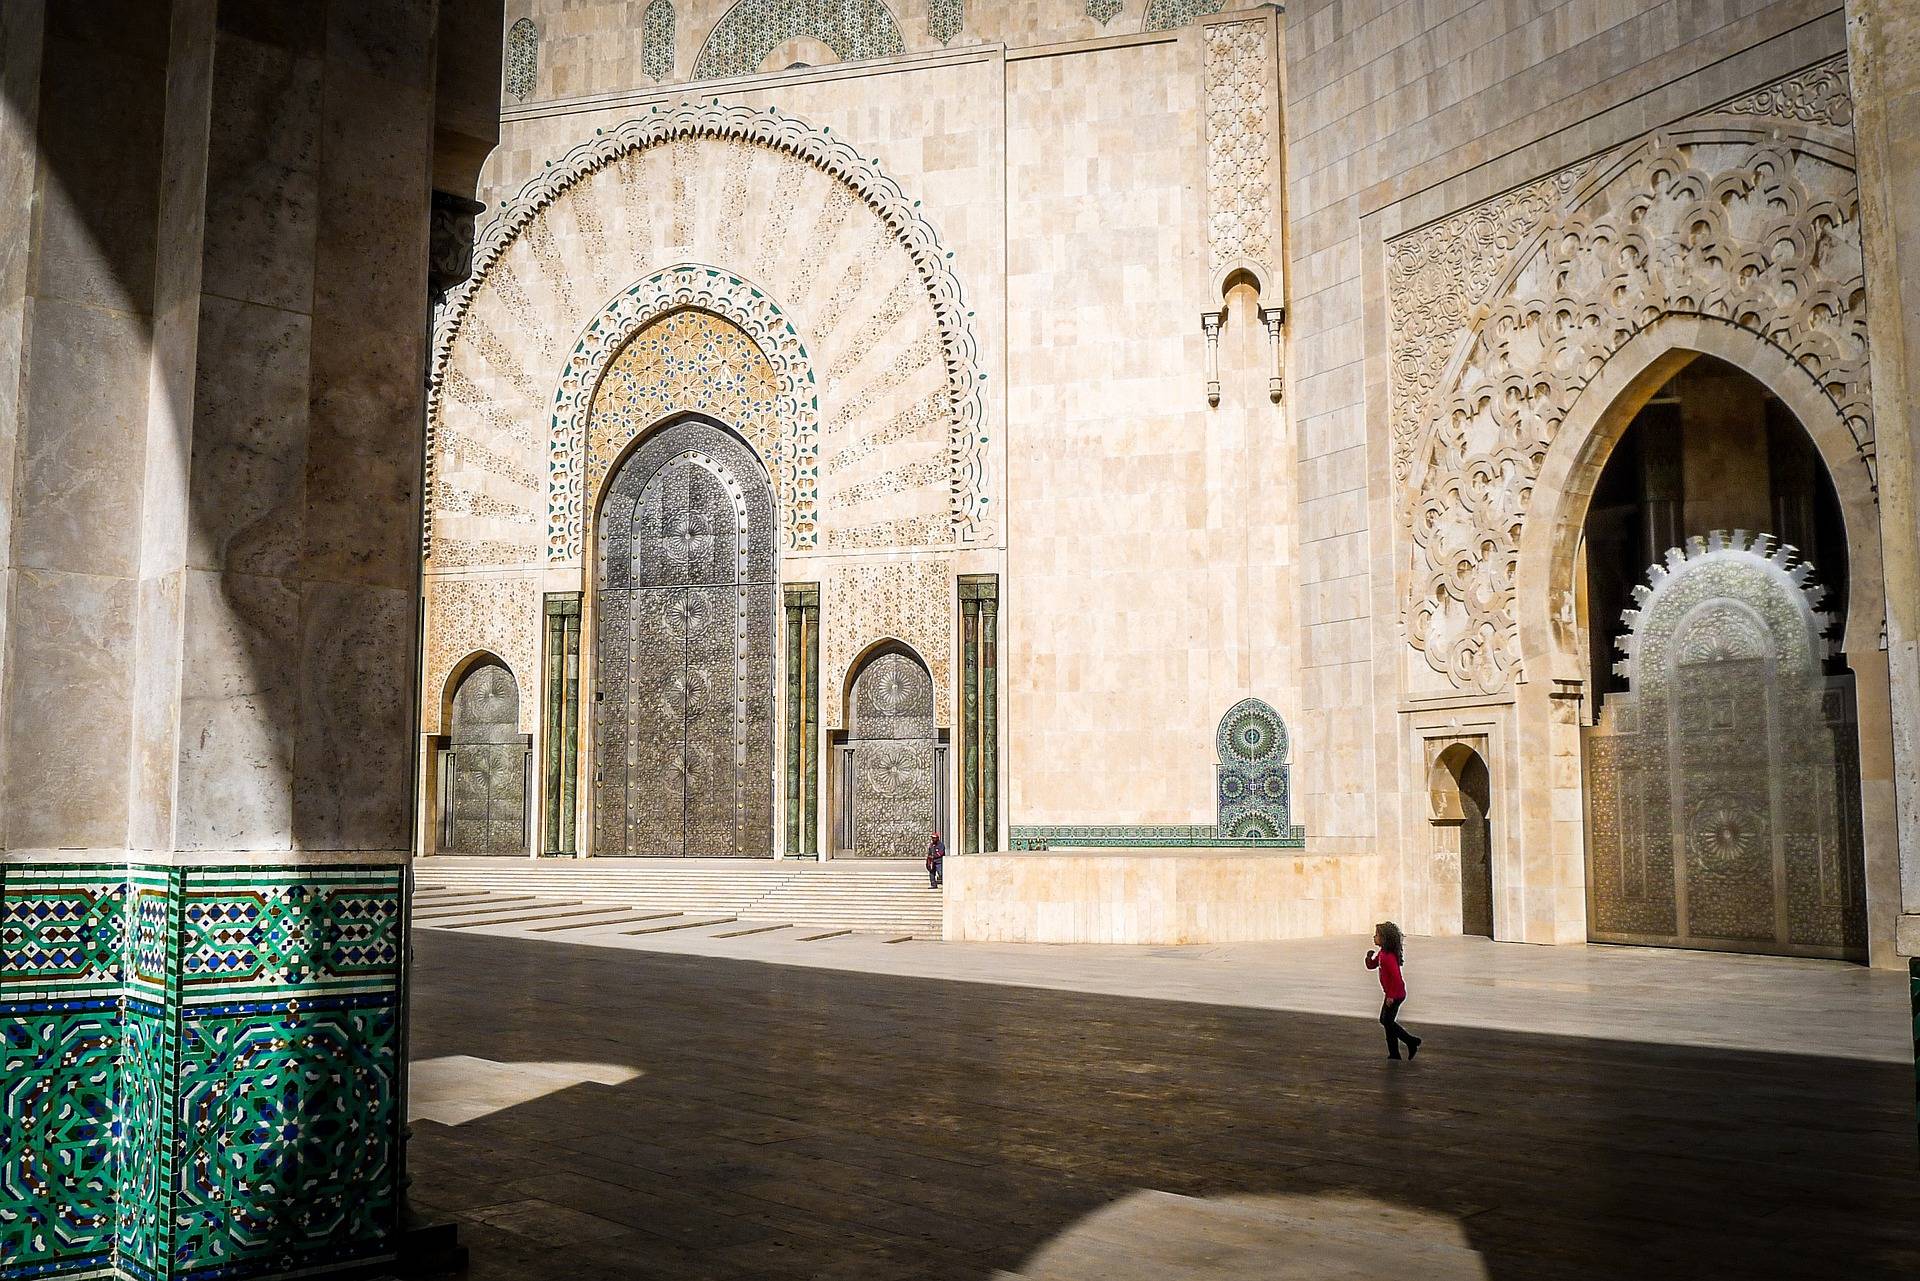 mosque hassan gbd4be1282 1920 - Morocco Private Tours - Best Morocco Tours